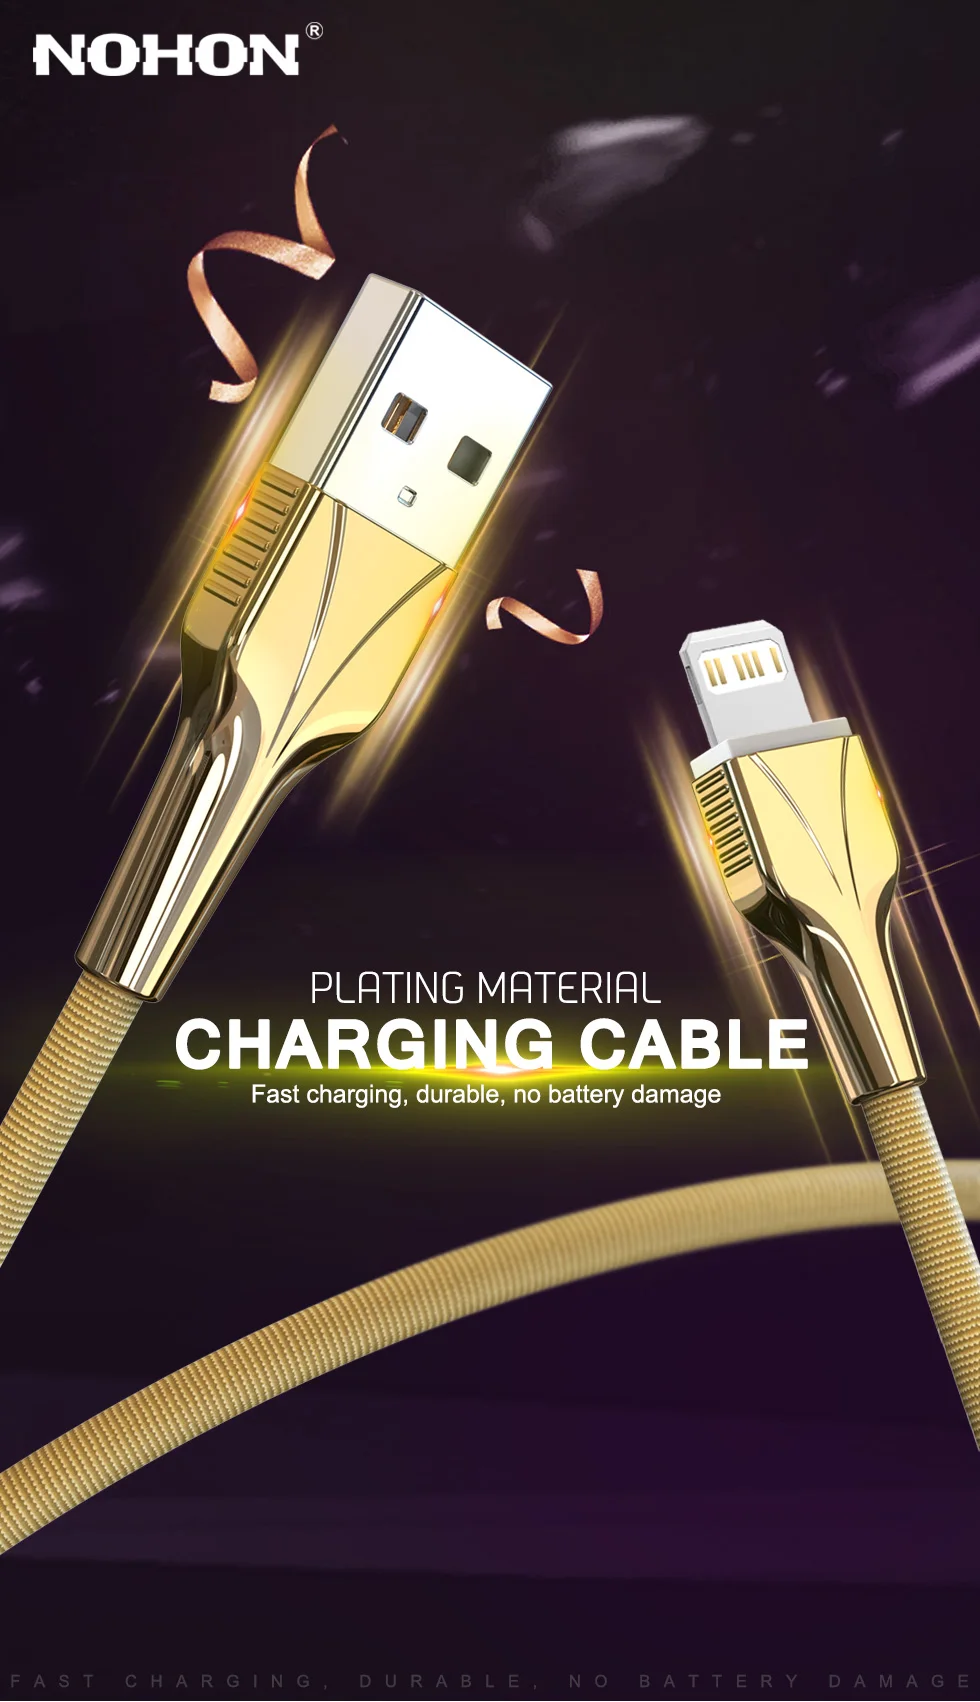 android data cable 3A USB Fast Charging Cable For Apple iPhone 13 12 11 XS Max XR X 8 7 6 S 6S Plus 5 SE 2 iPad Mini Charger Mobile Phone Data Cord types of mobile charger